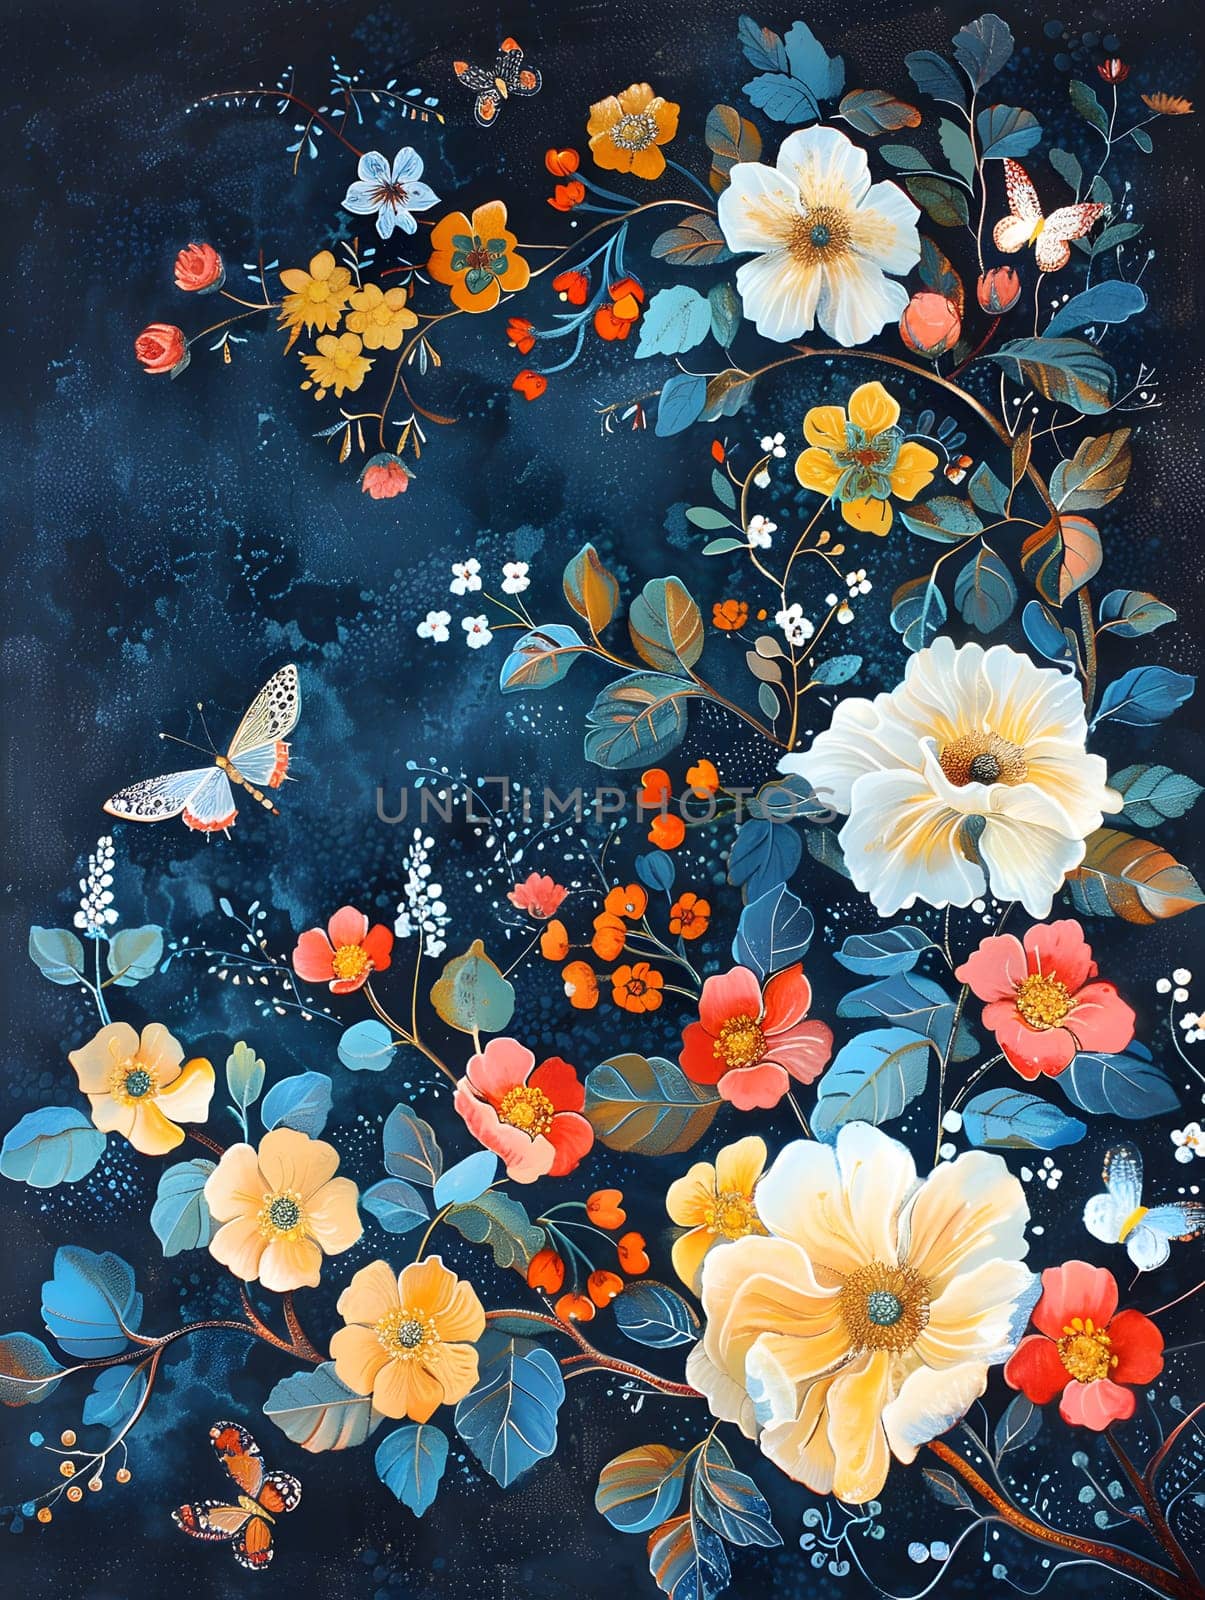 A beautiful painting featuring a floral design of flowers and butterflies on a dark background, showcasing the intricate details of petals and plant life